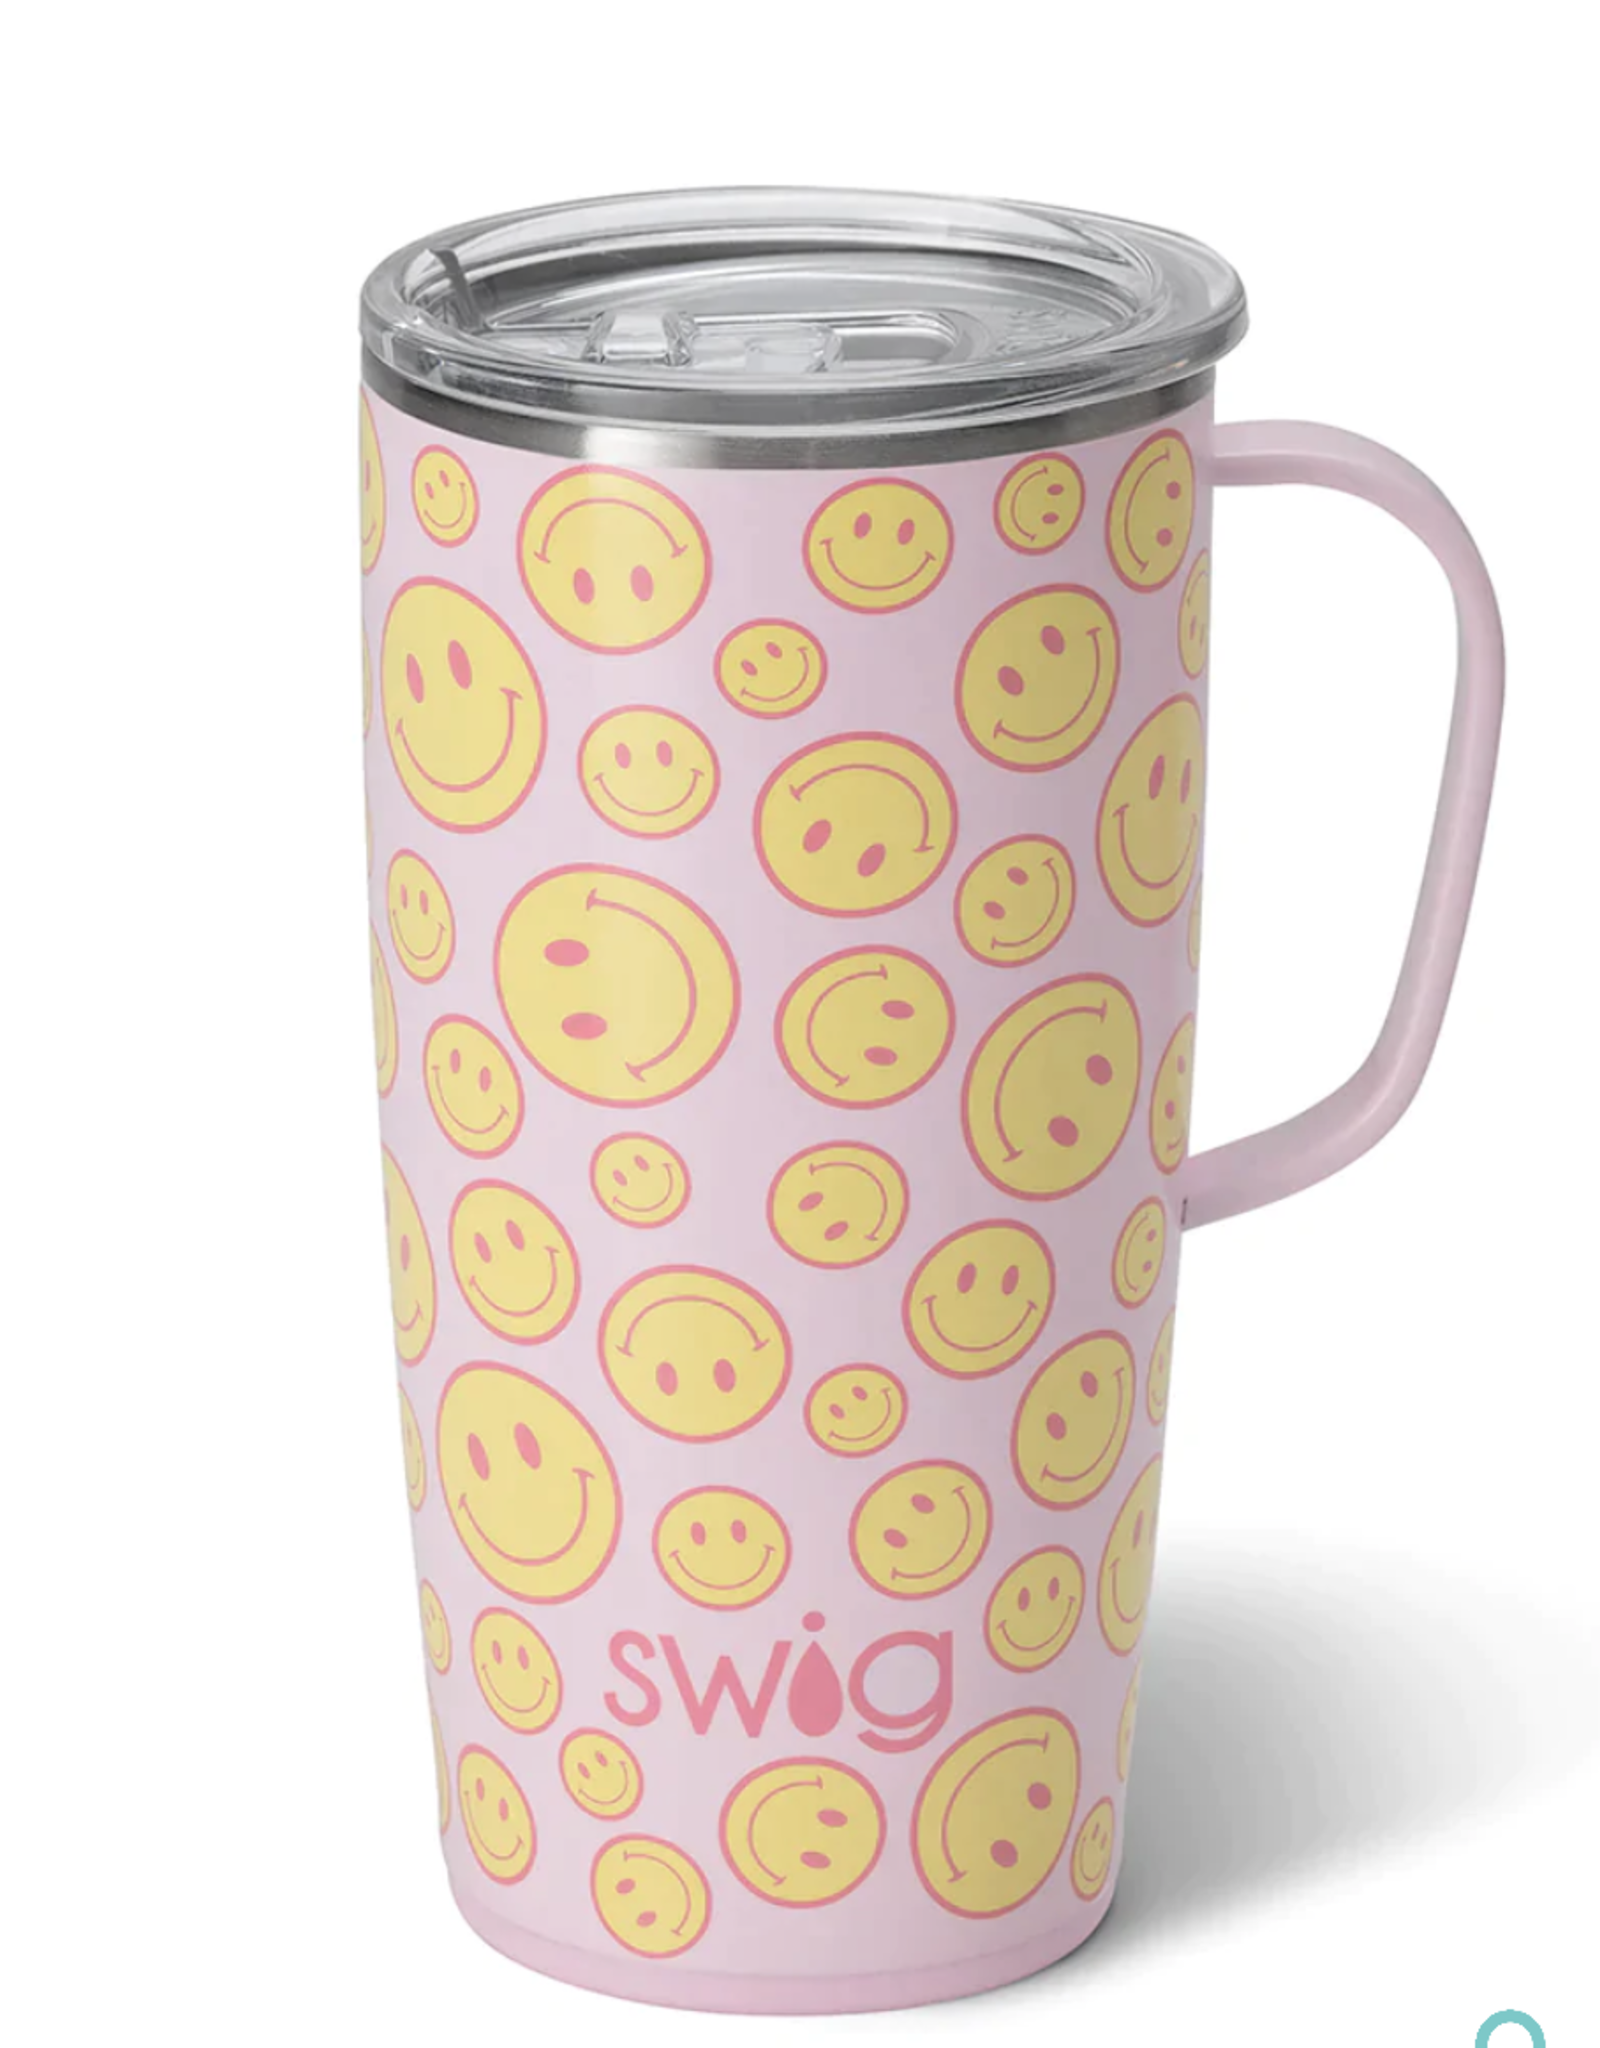 Swig Swig Oh Happy Day Collection